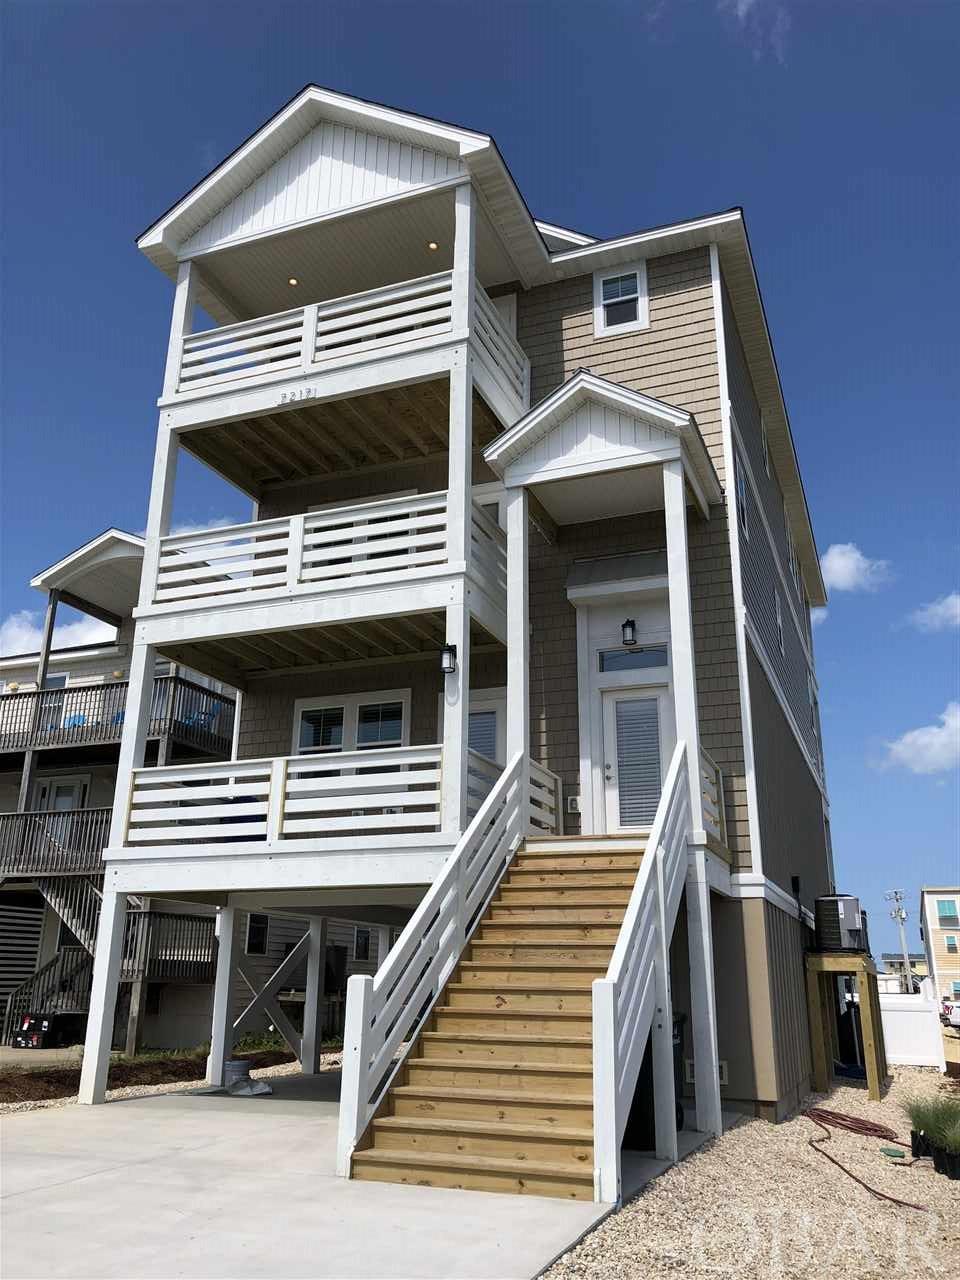 Newer construction, built in 2018. Ocean & Sound Views. Location, Location, Location. All rooms have beautiful views of ocean or sound. 2 min walk to restaurants, market, and beach.   Elevator, Swimming pool. Game room, large bedrooms. Top floor is open kitchen, living, dining, with covered porches on east and west side. Watch sunrise from ocean then sunset into sound. Bedrooms have beautiful ocean and sound views. No details missed in furnishings, house furnishings and layout.    See across sound to Pirates Cove, and Sugar Creek. One lot back from two beach access (Grey Eagle & Jennette's Pier). 2 minute walk to Jennette's Pier, Sam & Omies Restaurant, Cahoons General Store, Dune Burger, Fat Boyz Ice Cream & Grill. Close to restaurants: Lone Cedar, Owens, Sugar Creek, Outlet Mall. Top rental producer, something for everyone. Great for families & guests attending events at Jennette's Pier. Altogether the combination necessary for strong vacation rentals every month of the year.